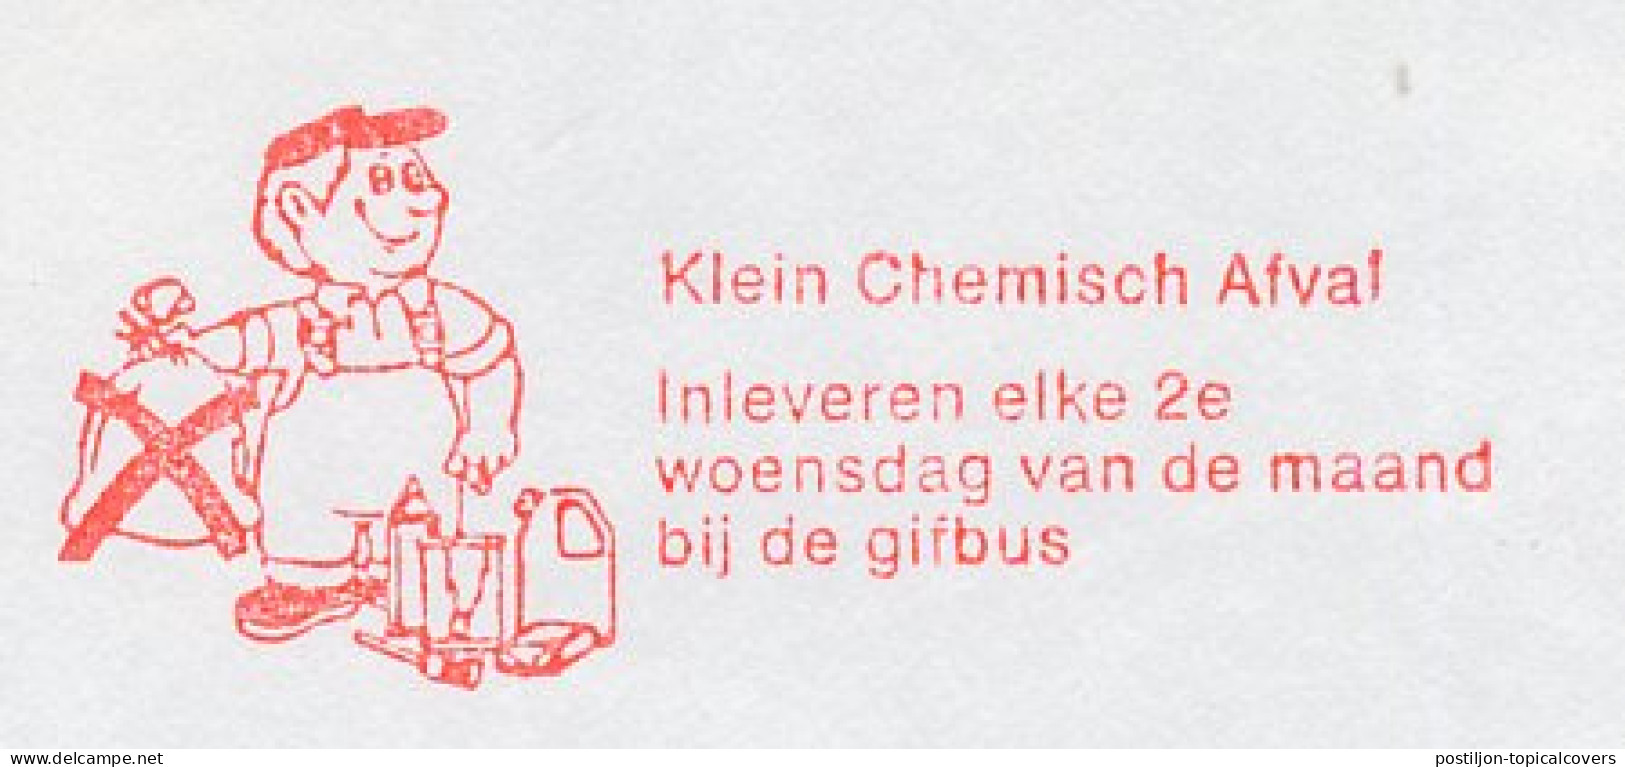 Meter Top Cut Netherlands 1993 Chemical Waste - Hand It In - Protection De L'environnement & Climat